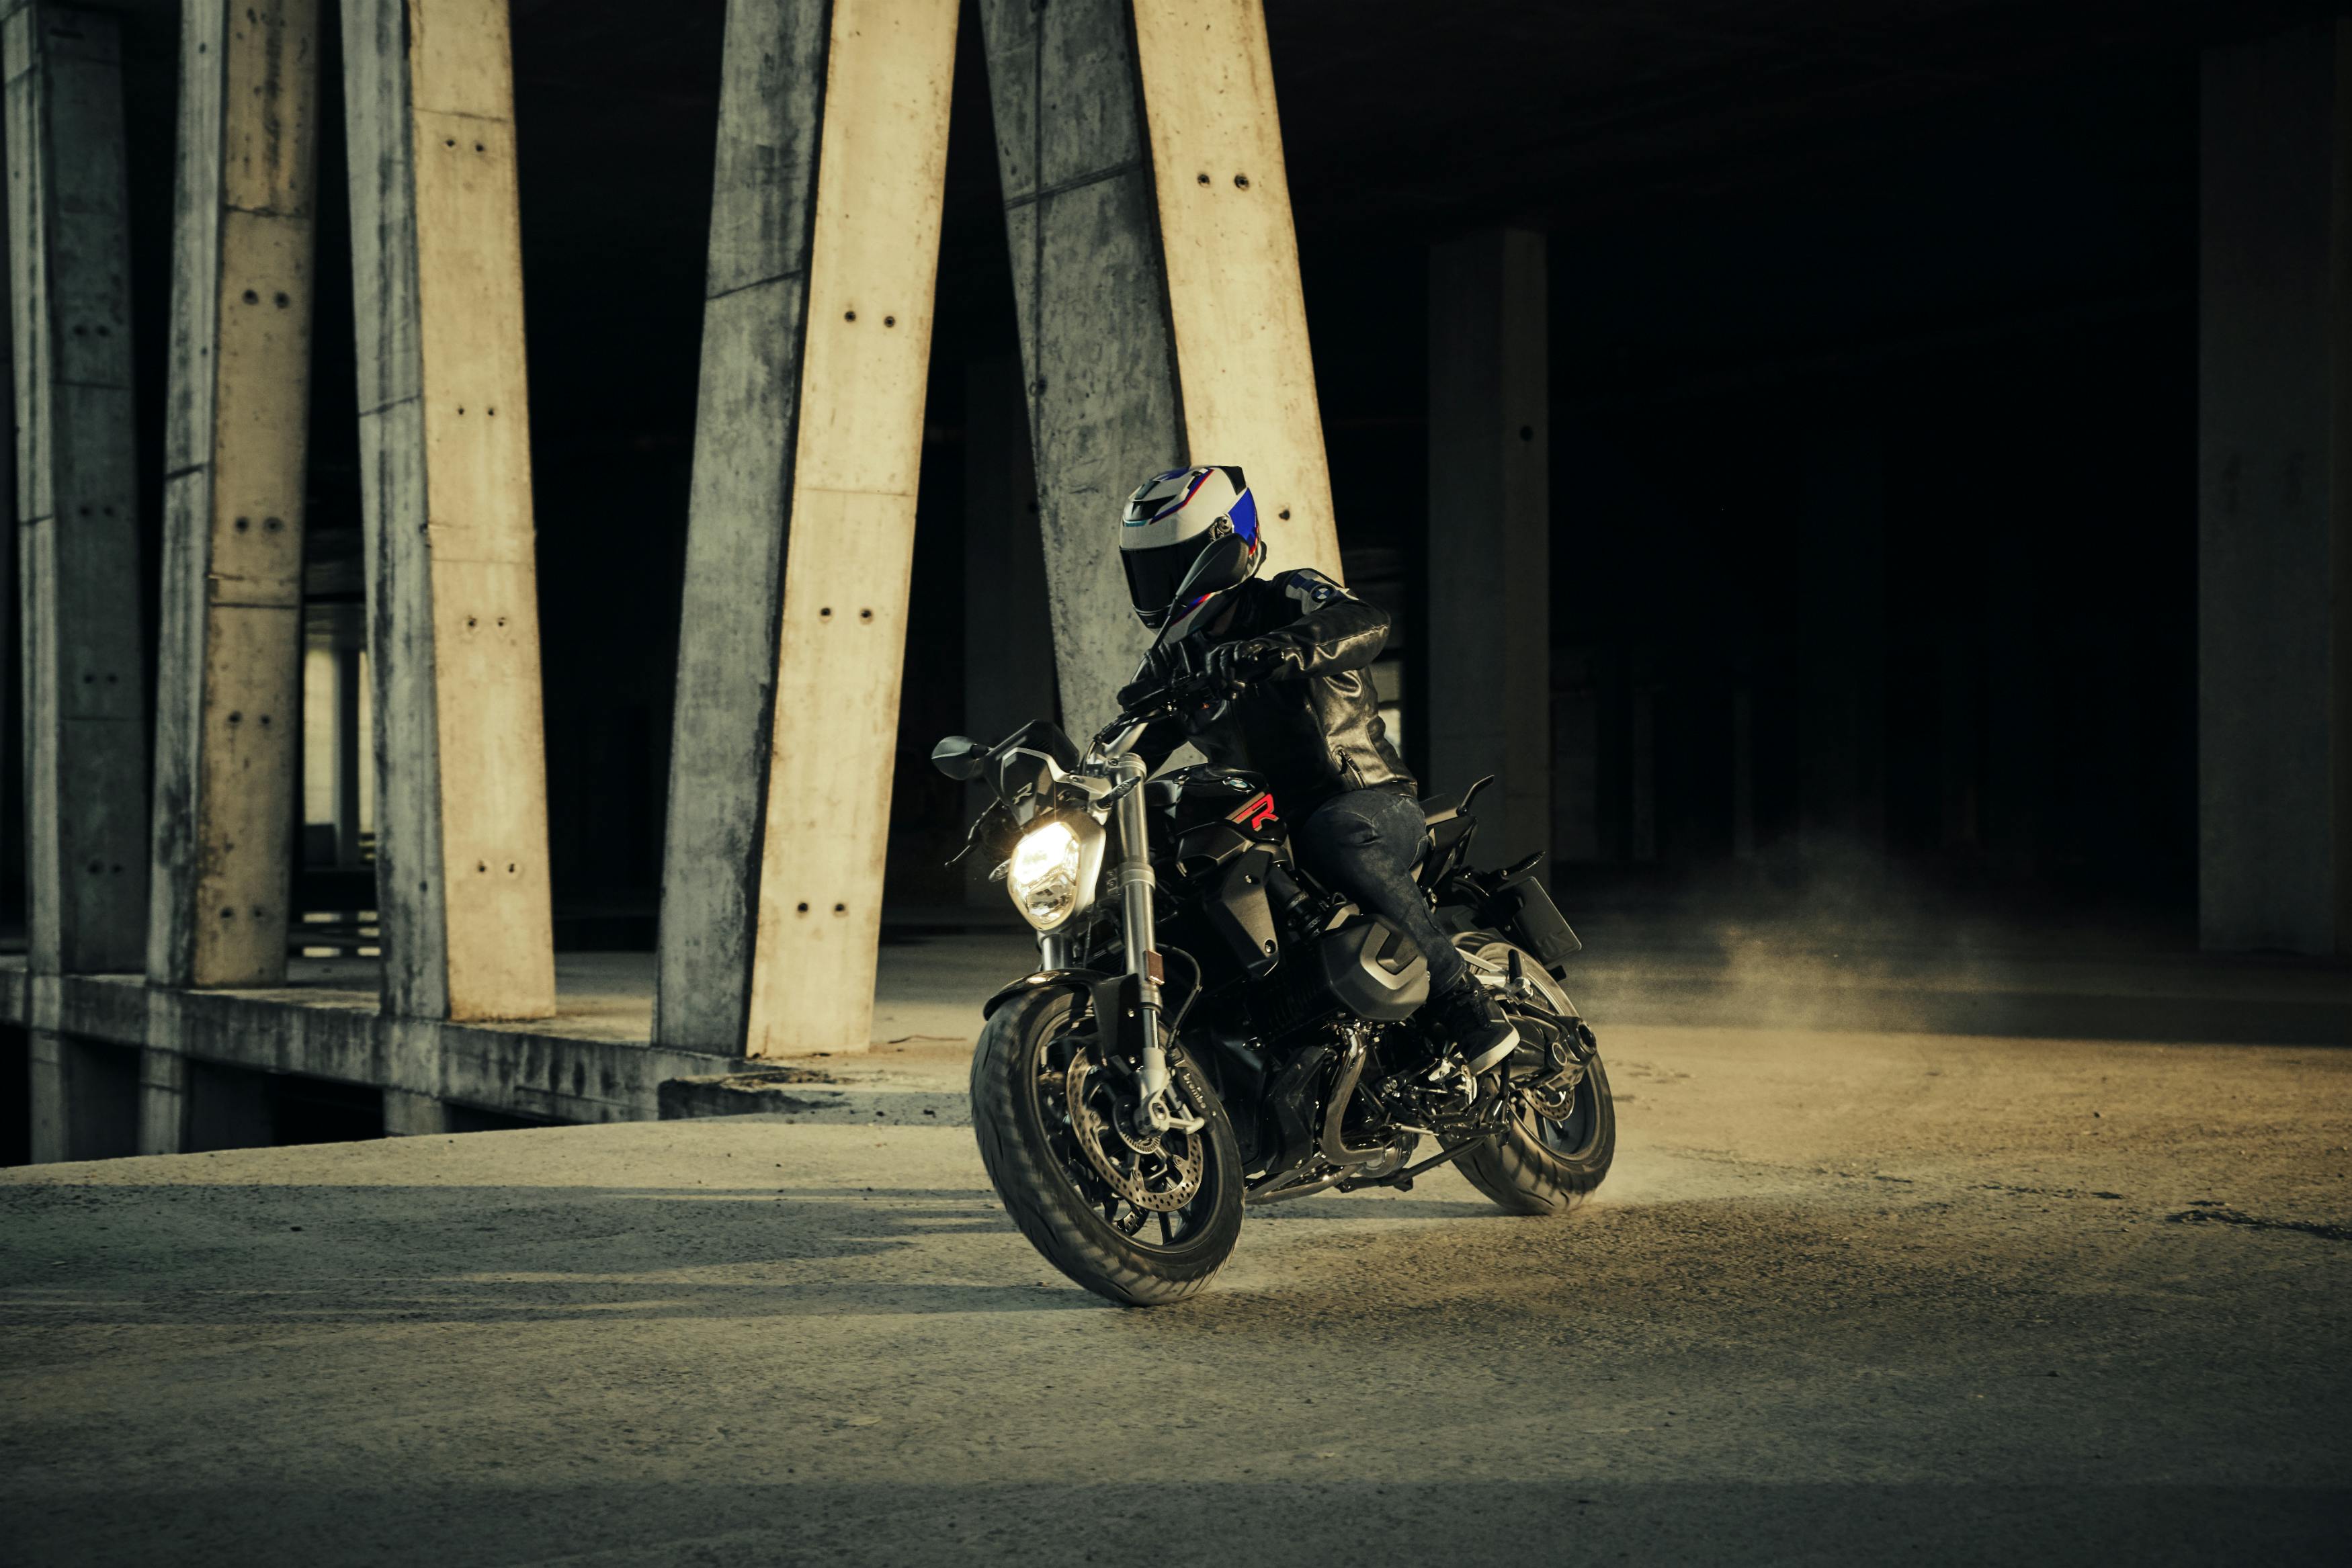 BMW R 1250 R EXCLUSIVE being ridden on the road